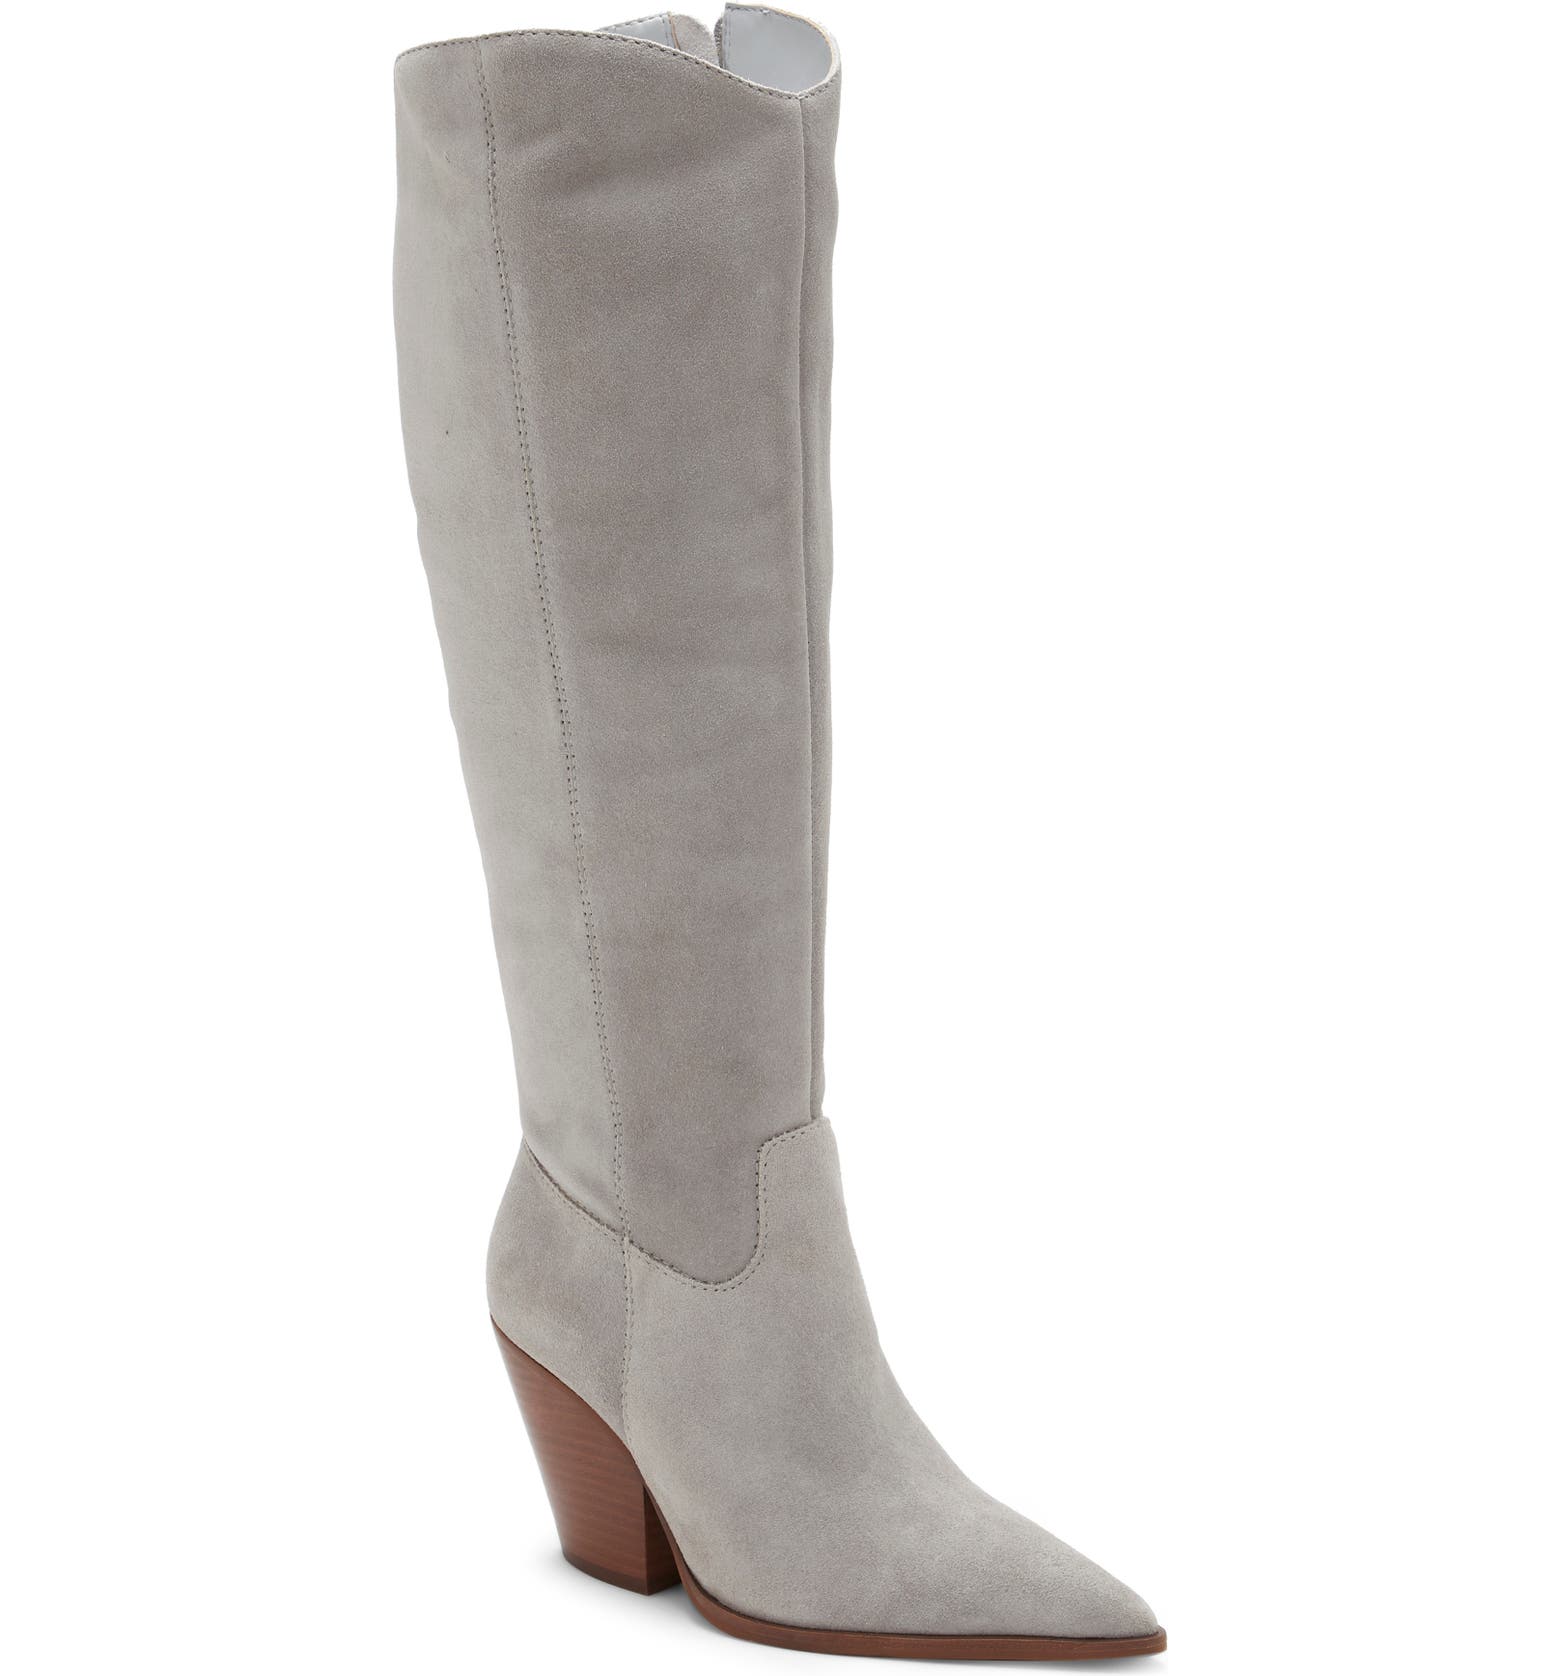 Light grey suede knee-high boots